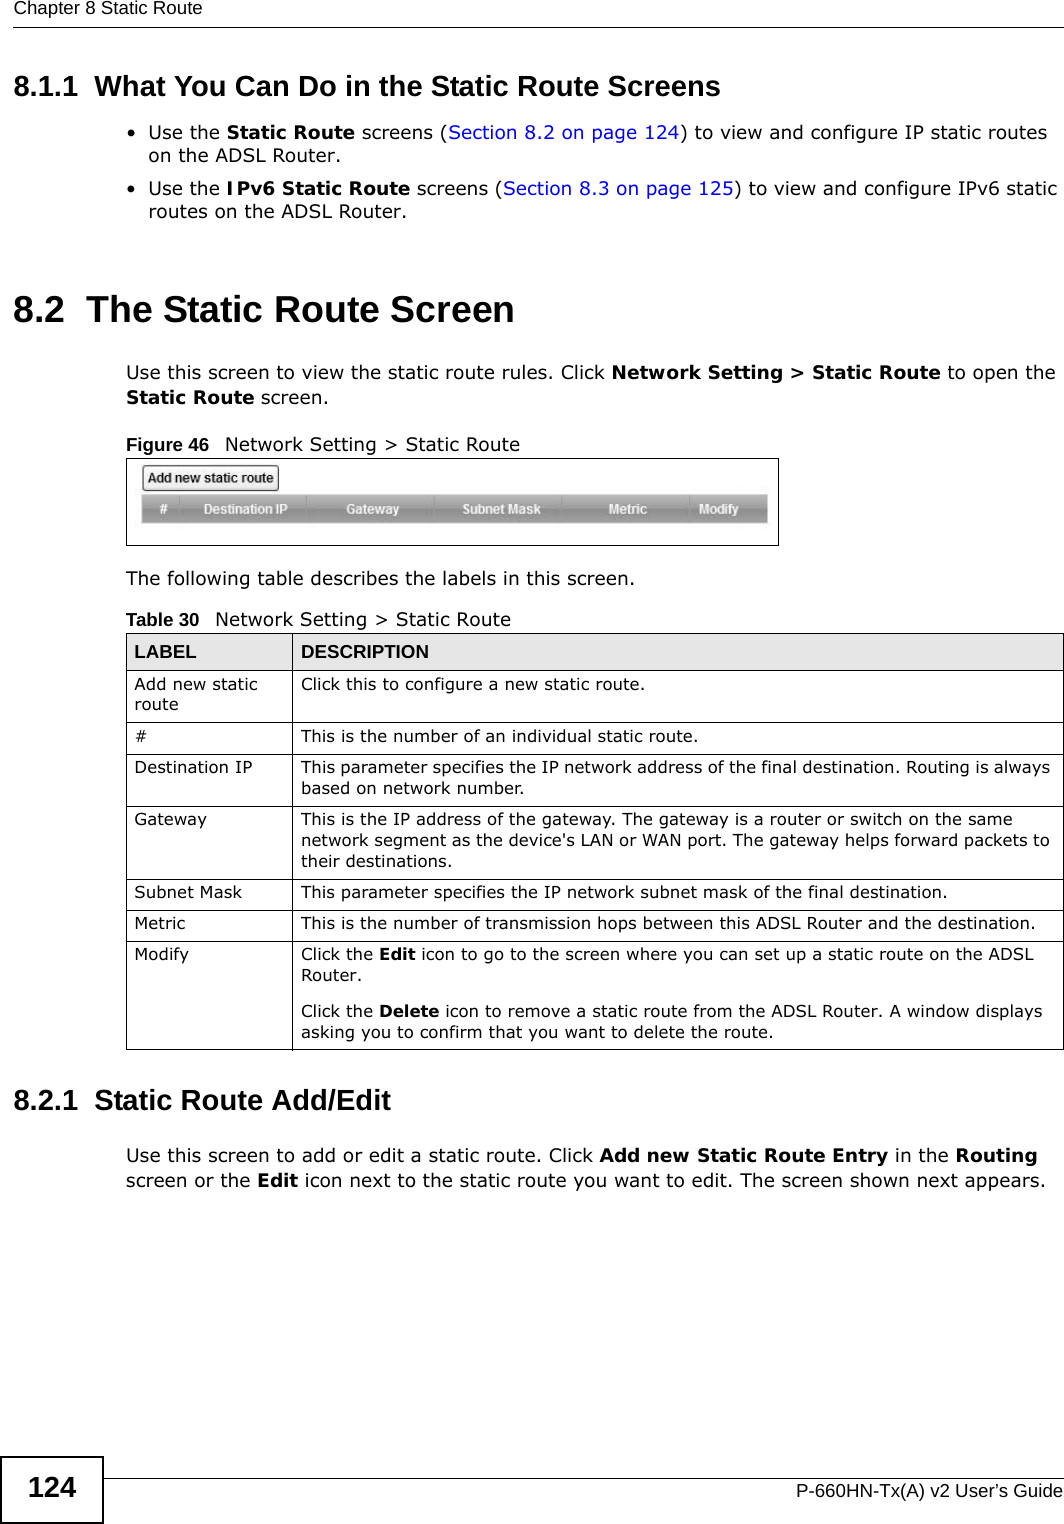 Chapter 8 Static RouteP-660HN-Tx(A) v2 User’s Guide1248.1.1  What You Can Do in the Static Route Screens•Use the Static Route screens (Section 8.2 on page 124) to view and configure IP static routes on the ADSL Router.•Use the IPv6 Static Route screens (Section 8.3 on page 125) to view and configure IPv6 static routes on the ADSL Router.8.2  The Static Route ScreenUse this screen to view the static route rules. Click Network Setting &gt; Static Route to open the Static Route screen.Figure 46   Network Setting &gt; Static RouteThe following table describes the labels in this screen. 8.2.1  Static Route Add/Edit   Use this screen to add or edit a static route. Click Add new Static Route Entry in the Routing screen or the Edit icon next to the static route you want to edit. The screen shown next appears.Table 30   Network Setting &gt; Static RouteLABEL DESCRIPTIONAdd new static routeClick this to configure a new static route.#This is the number of an individual static route.Destination IP This parameter specifies the IP network address of the final destination. Routing is always based on network number. Gateway This is the IP address of the gateway. The gateway is a router or switch on the same network segment as the device&apos;s LAN or WAN port. The gateway helps forward packets to their destinations.Subnet Mask This parameter specifies the IP network subnet mask of the final destination.Metric This is the number of transmission hops between this ADSL Router and the destination.Modify Click the Edit icon to go to the screen where you can set up a static route on the ADSL Router.Click the Delete icon to remove a static route from the ADSL Router. A window displays asking you to confirm that you want to delete the route. 